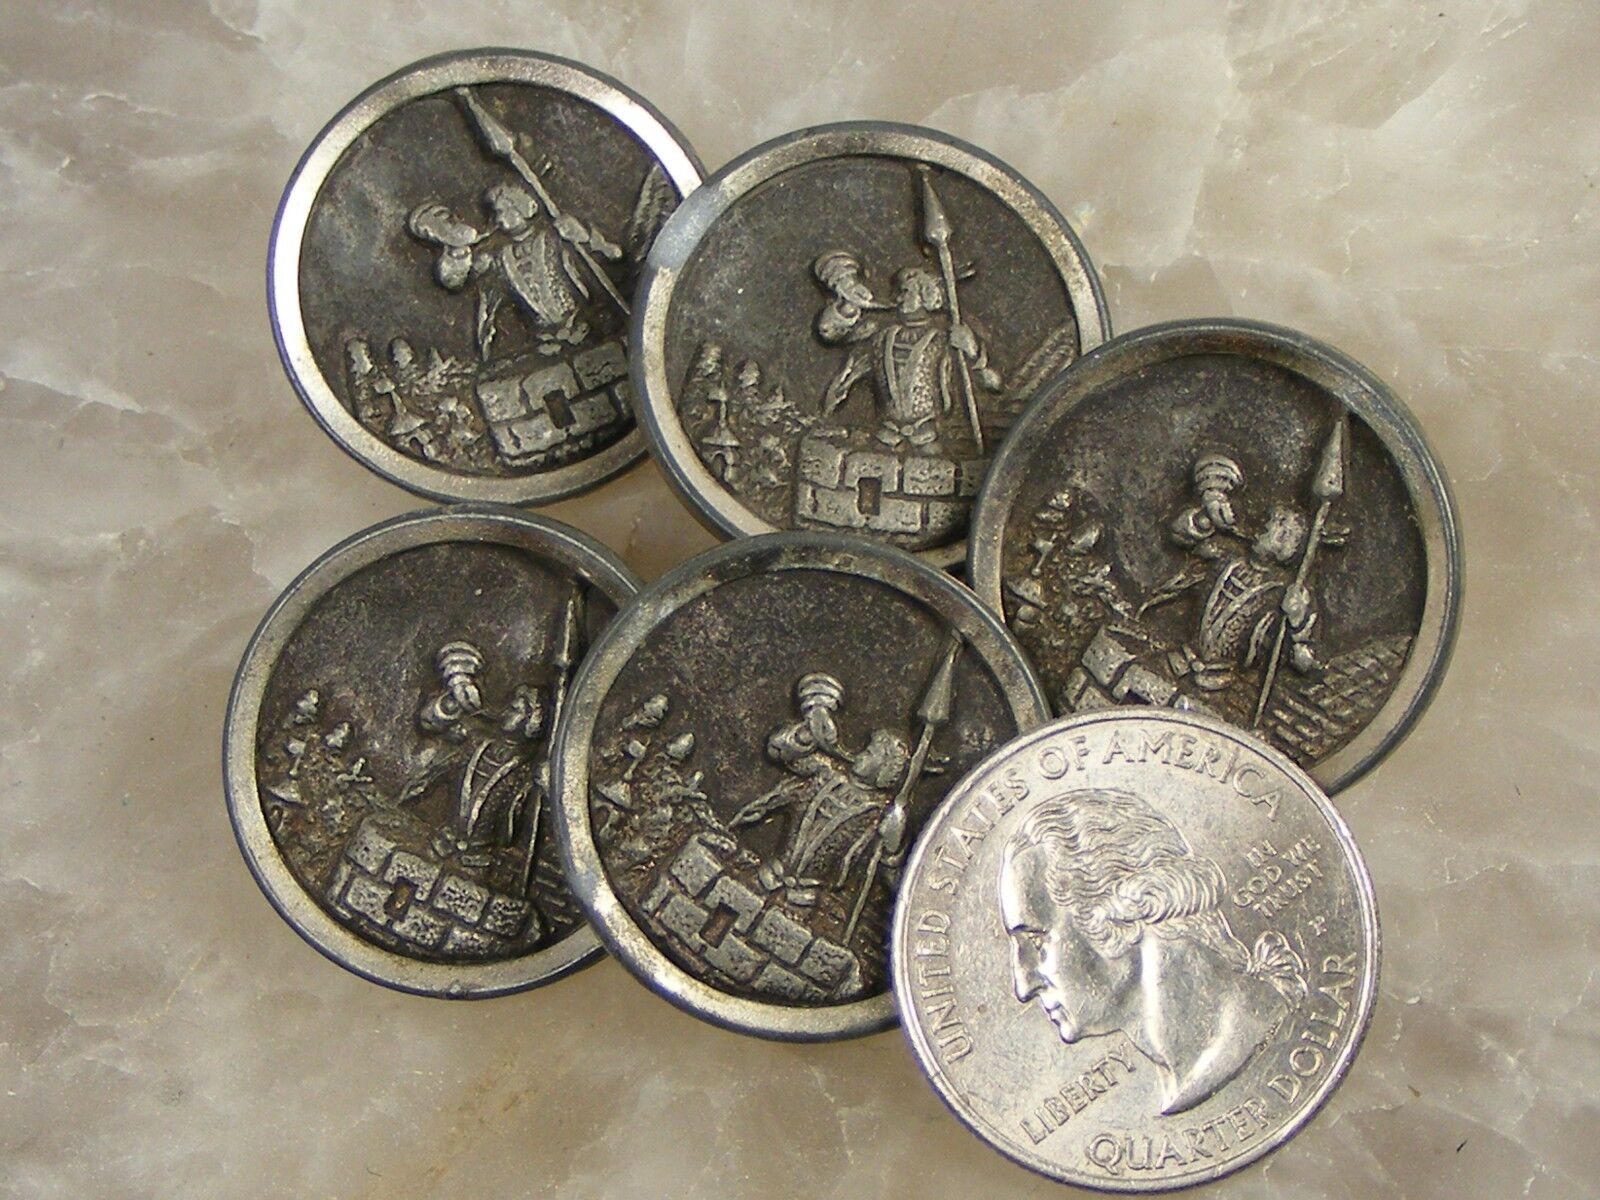 Antique Brass & Pewter Coat Story Book BUTTON Lot o 5 Soldier Castle Wall Spear  Без бренда - фотография #9